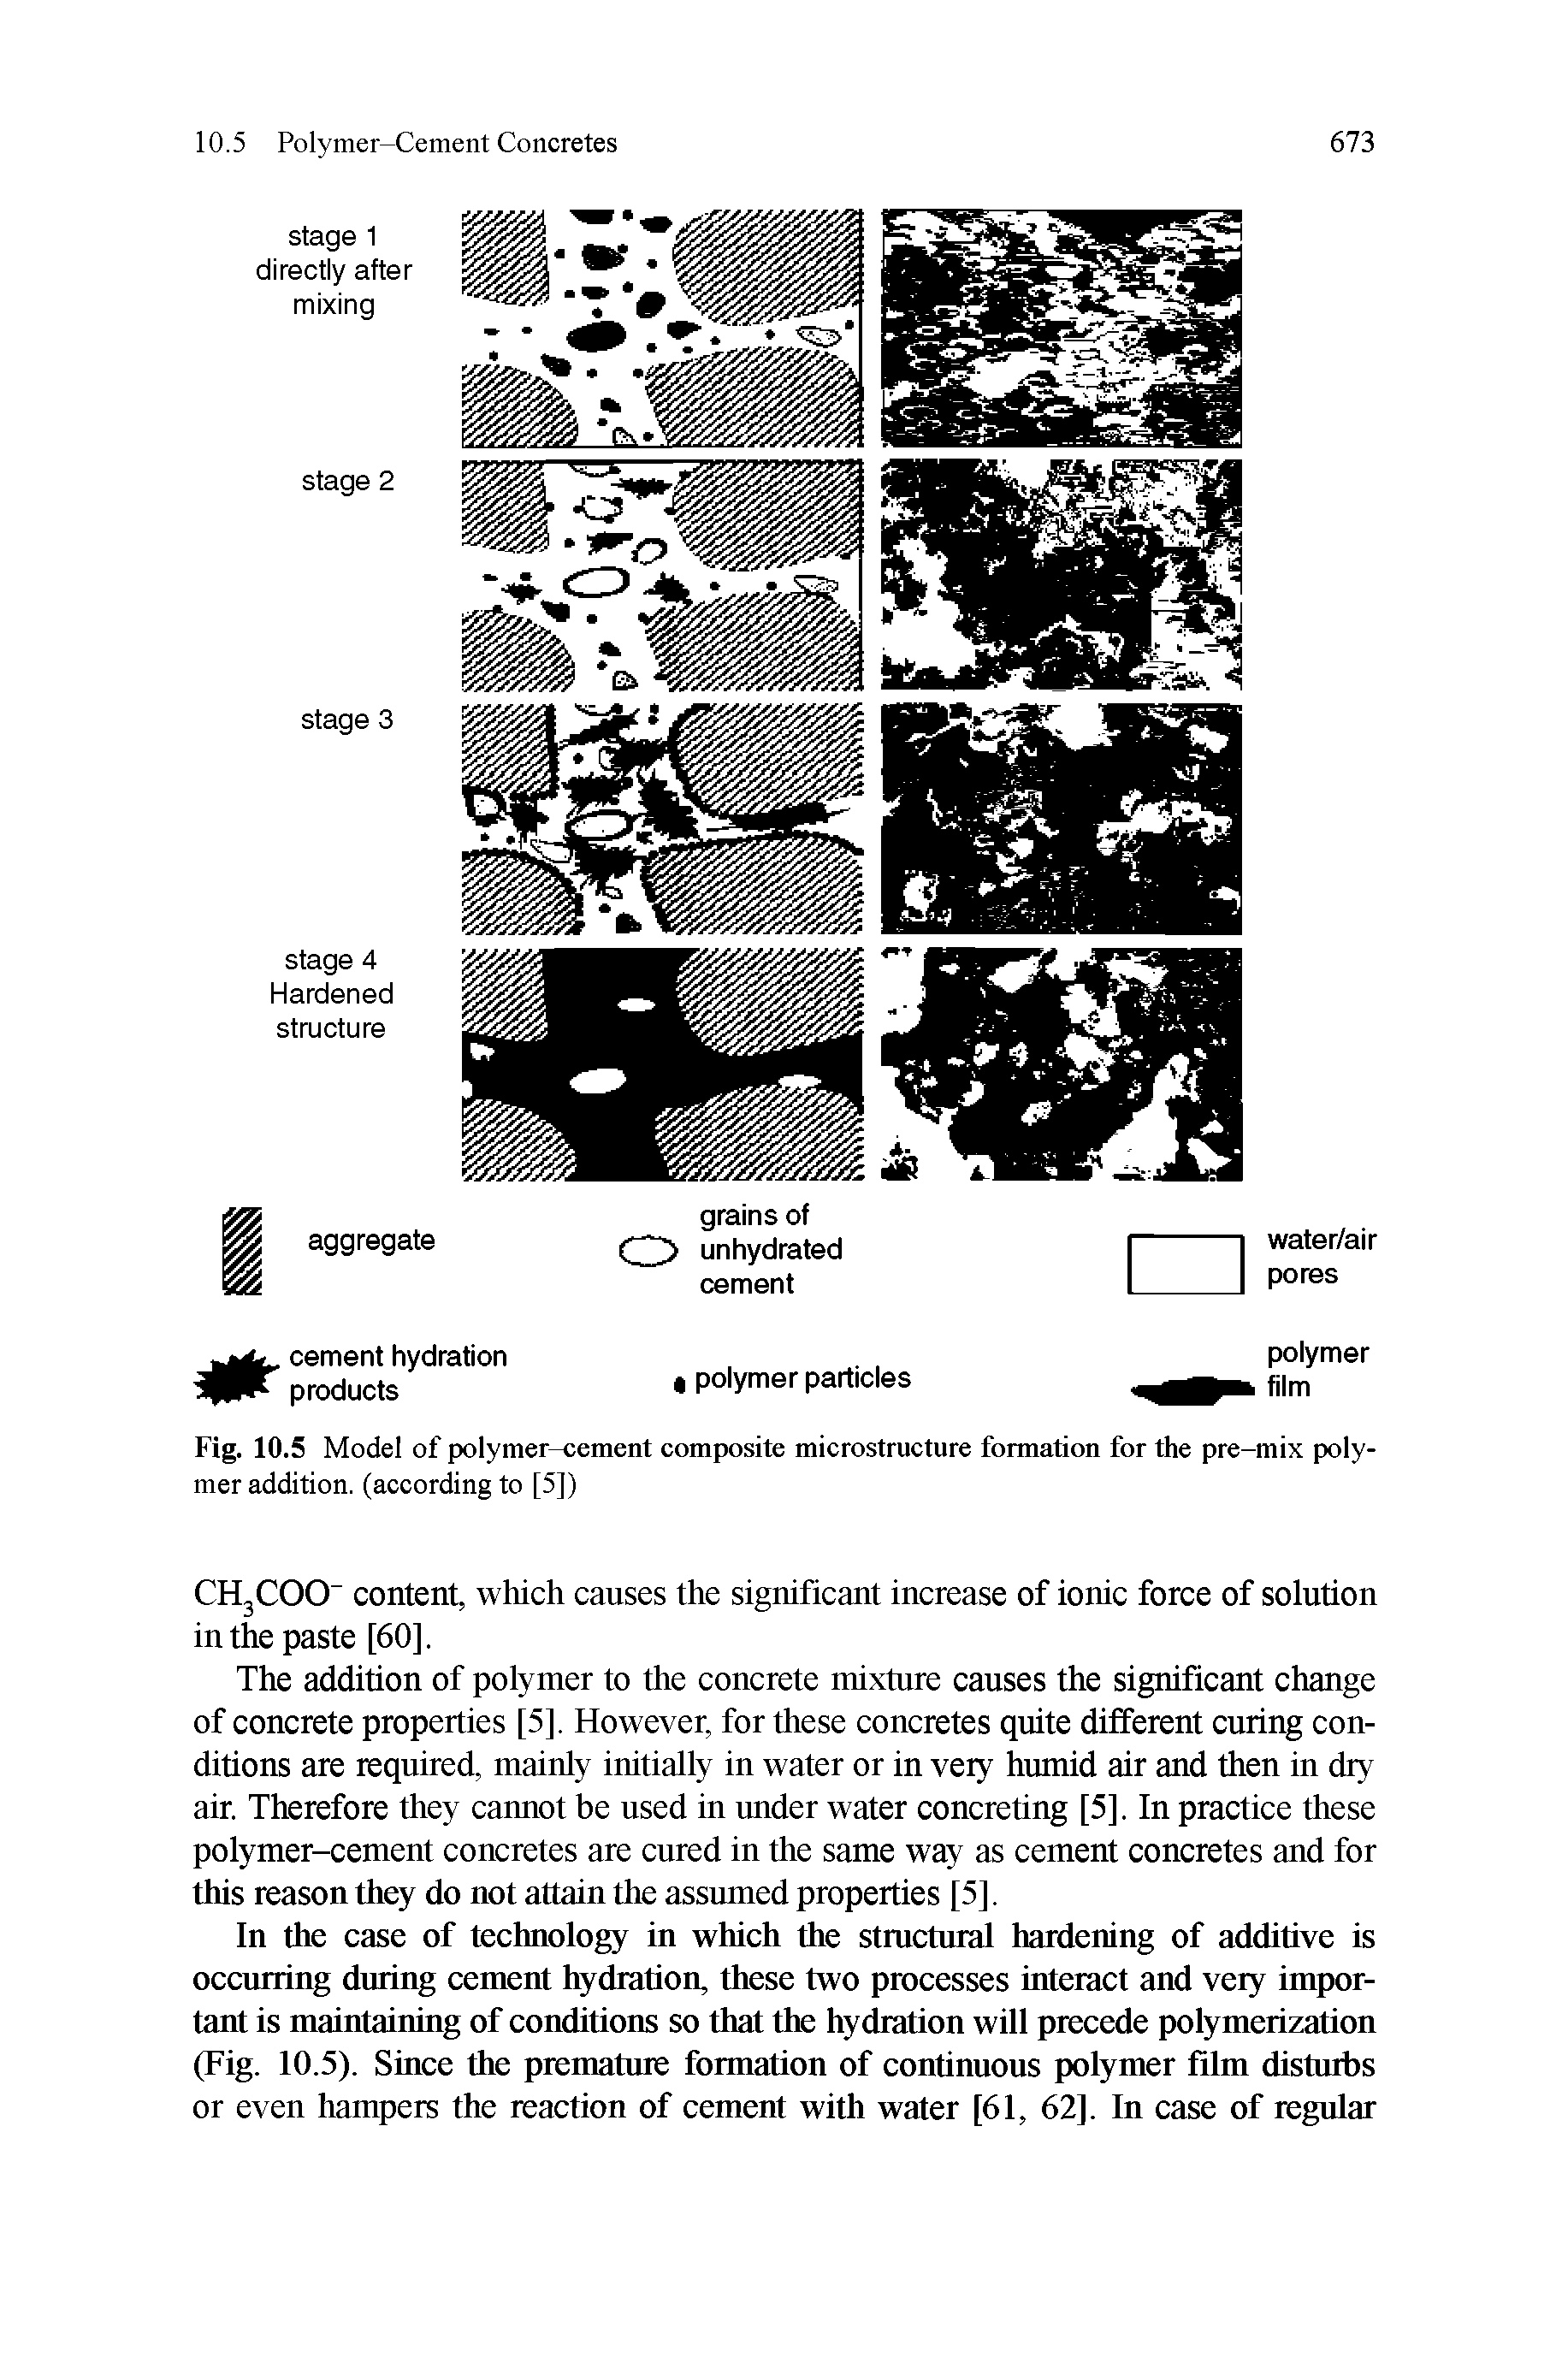 Fig. 10.5 Model of polymer-cement composite microstructure formation for the pre-mix polymer addition, (according to [5])...